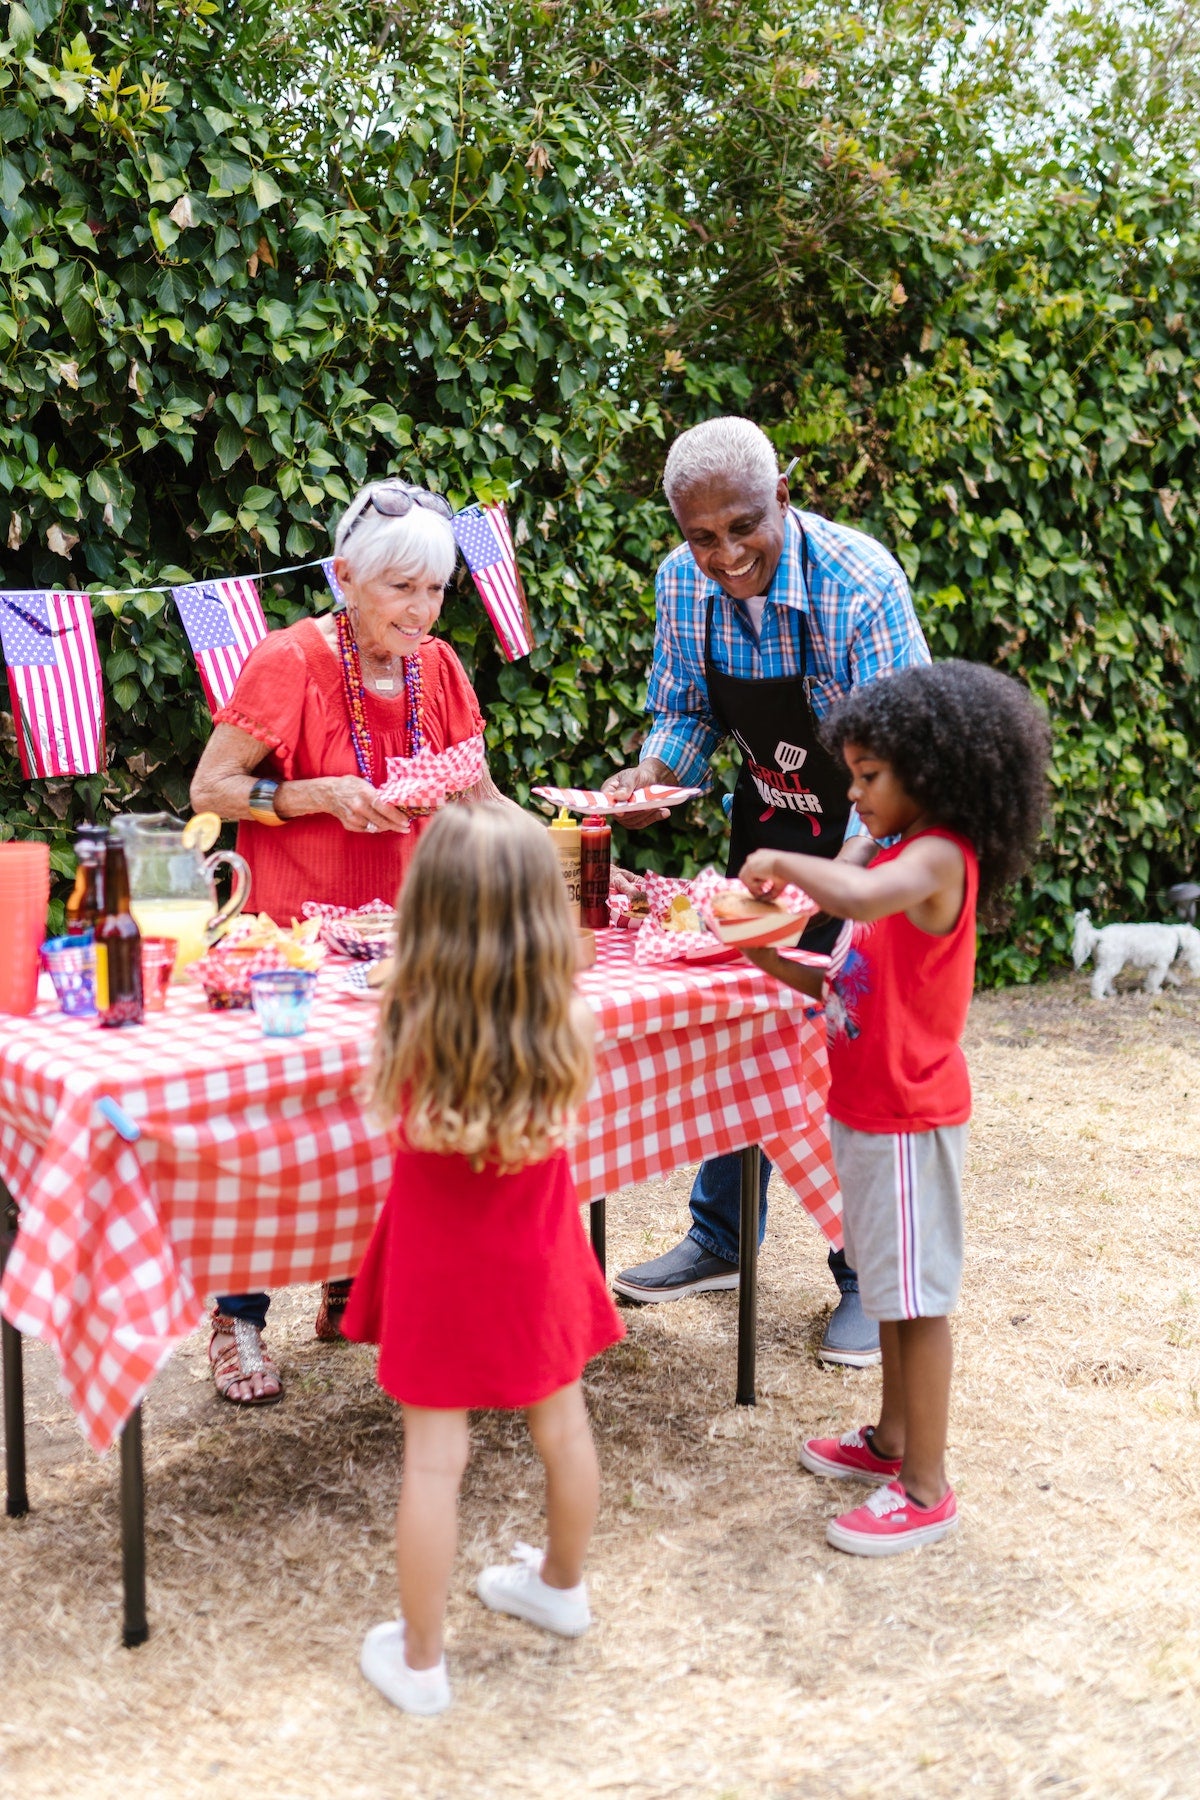 The Fourth of July: Celebrating Freedom and Flavorful Traditions